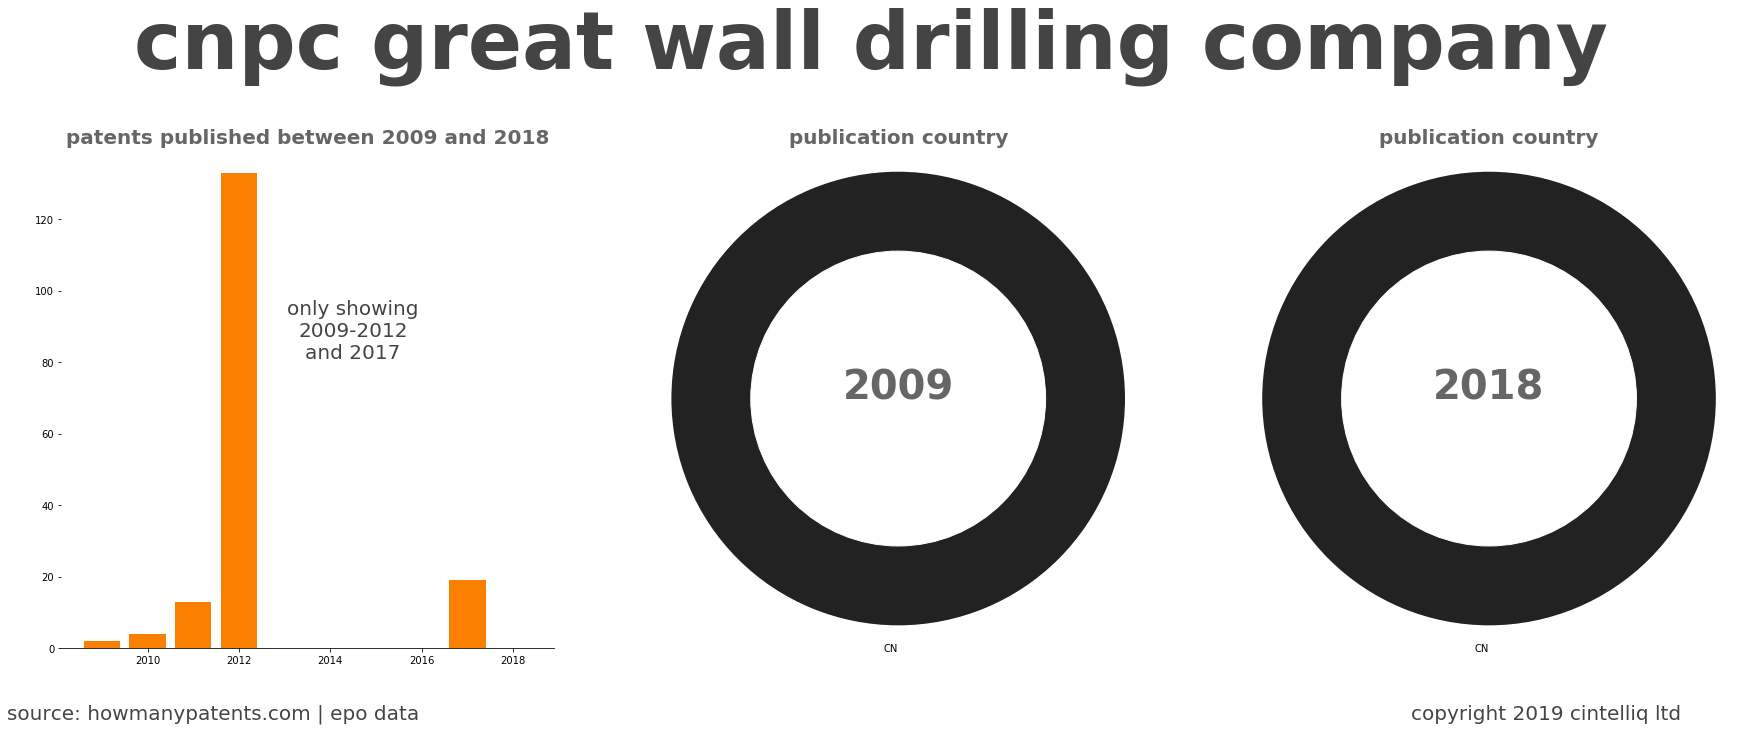 summary of patents for Cnpc Great Wall Drilling Company